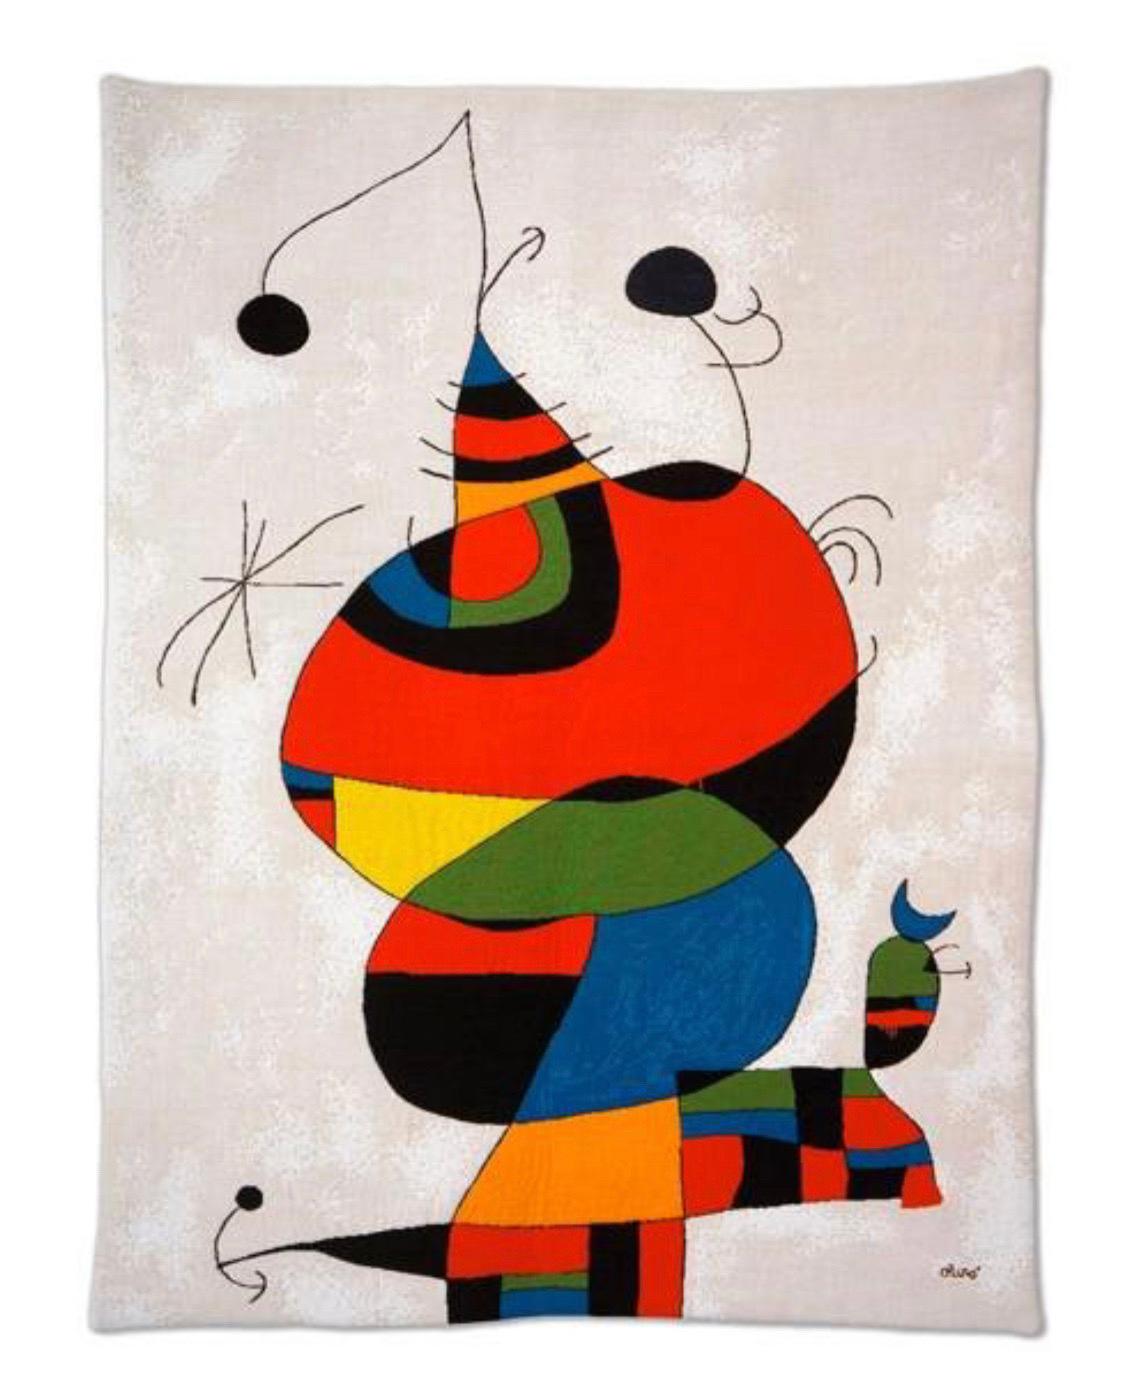 This is a lovely and large tapestry by Joan Miró.  He had several of his paintings translated into tapestry and carpets.  This wonderful example is a woven depiction of Miró's 